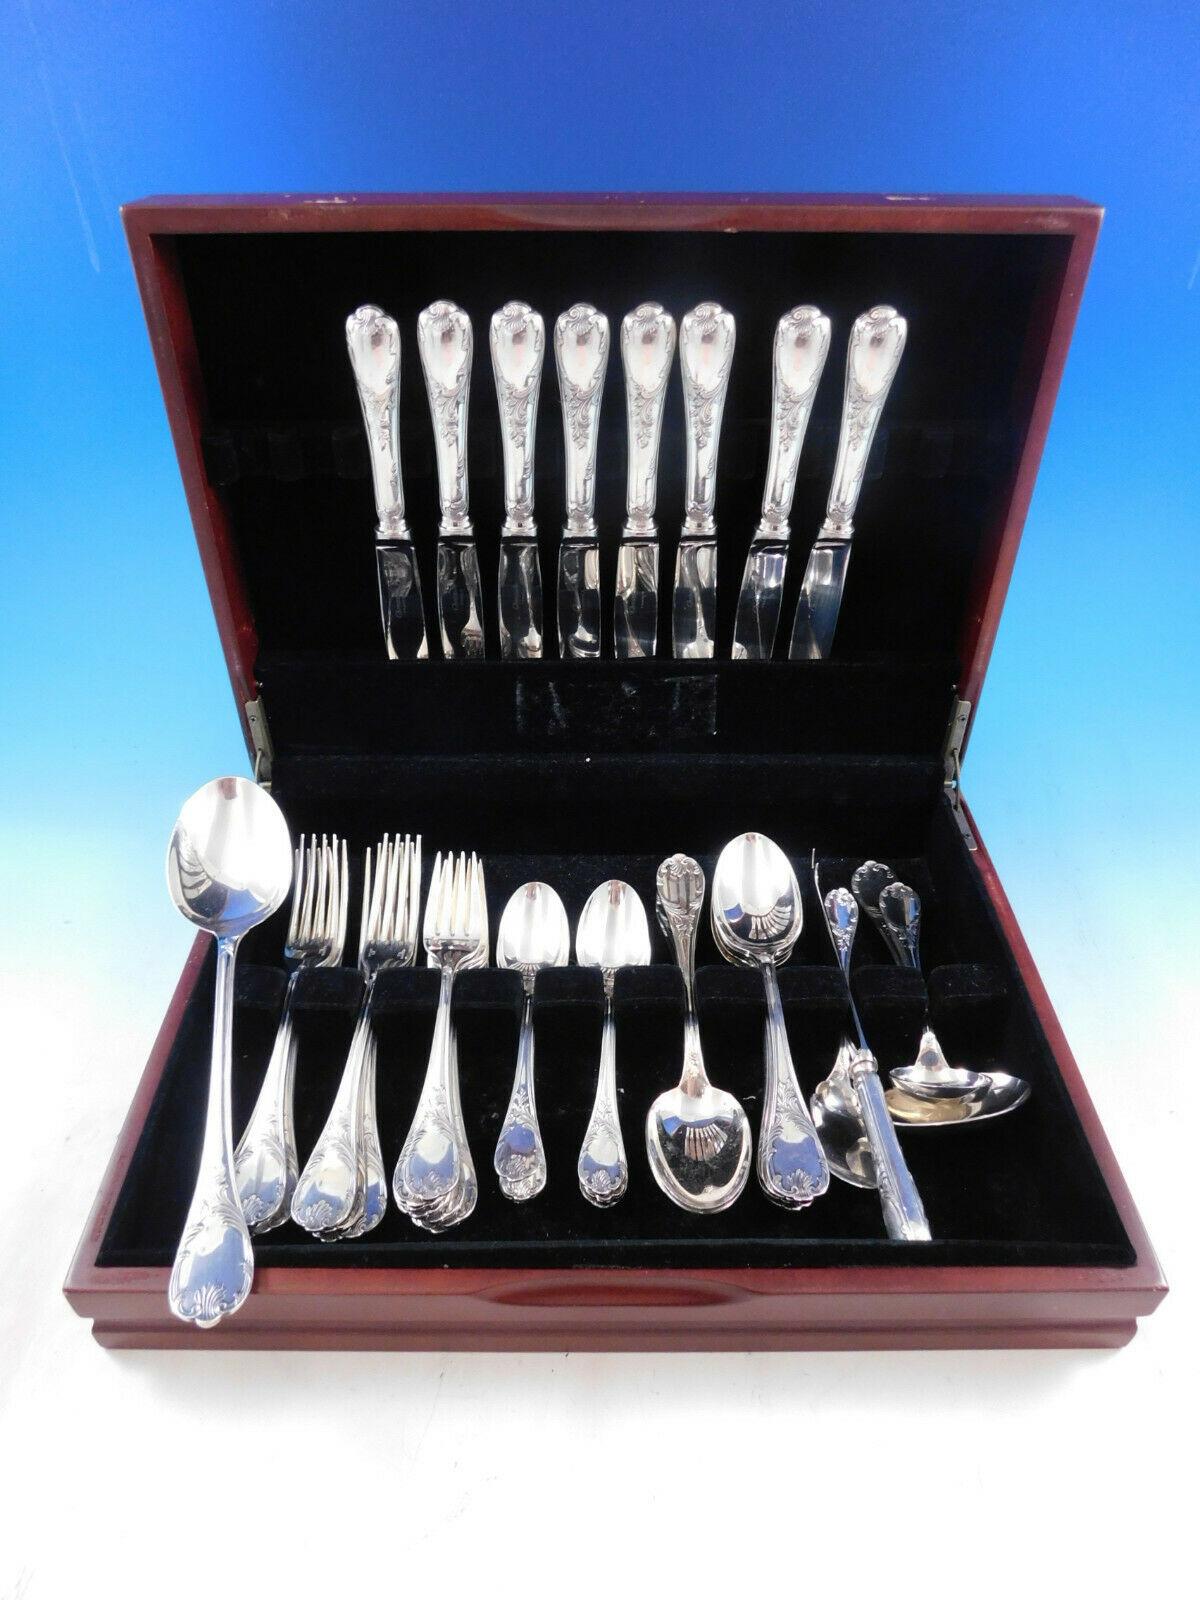 Marly by Christofle France estate silverplate flatware set, 45 pieces. This set includes:

8 knives, 9